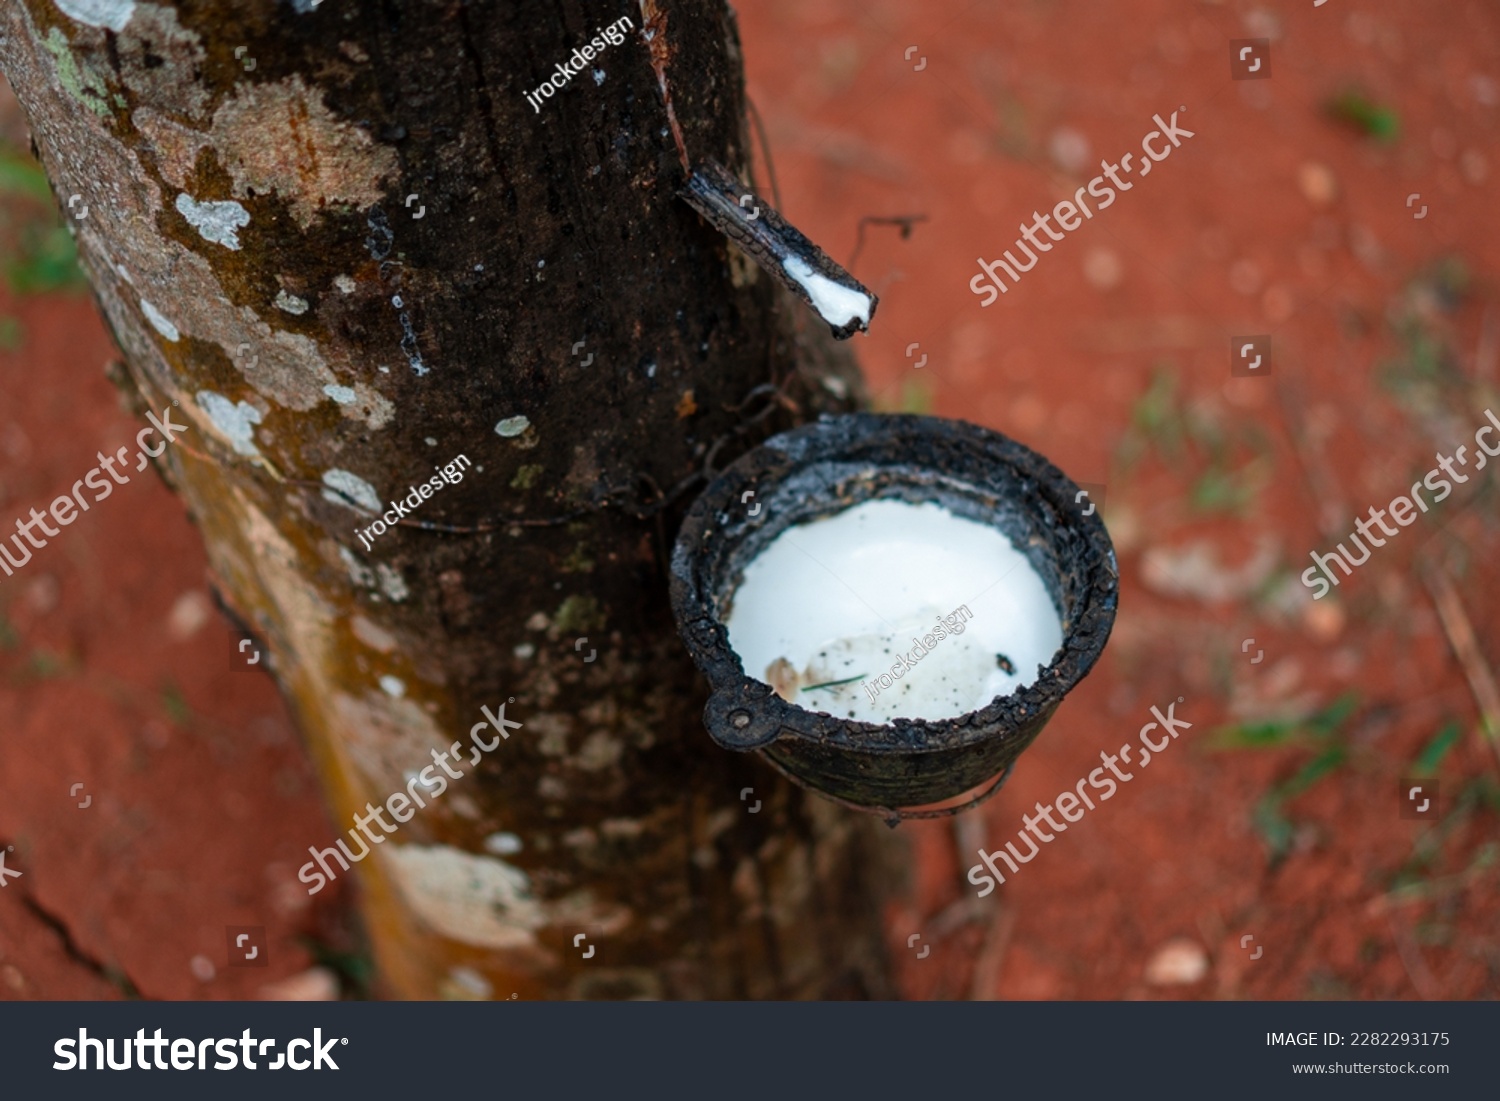 Latex extracted from tapped rubber tree as a source of natural rubber Latex raw material. Hevea brasiliensis forest. #2282293175